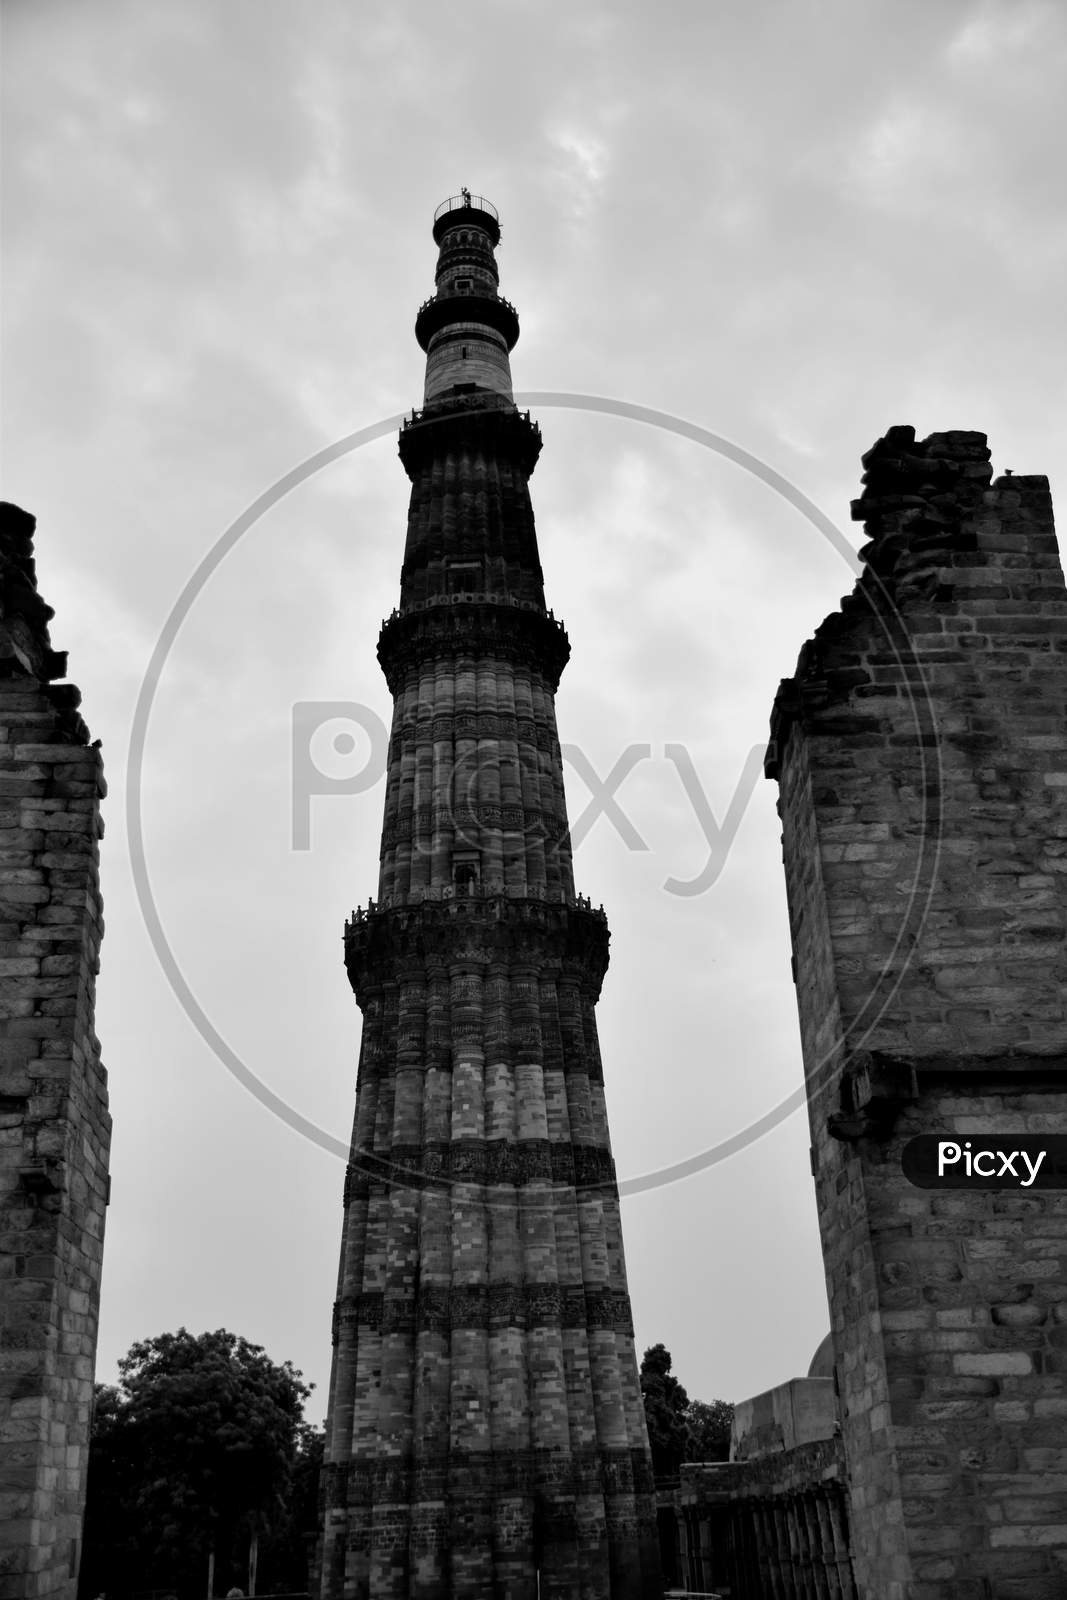 Qutub Minar New Delhi, India, The Tallest Minaret In India Is A Marble And Red Sandstone Tower That Represents The Beginning Of Muslim Rule, Qutub Minar Complex, World Tallest Brick Minaret